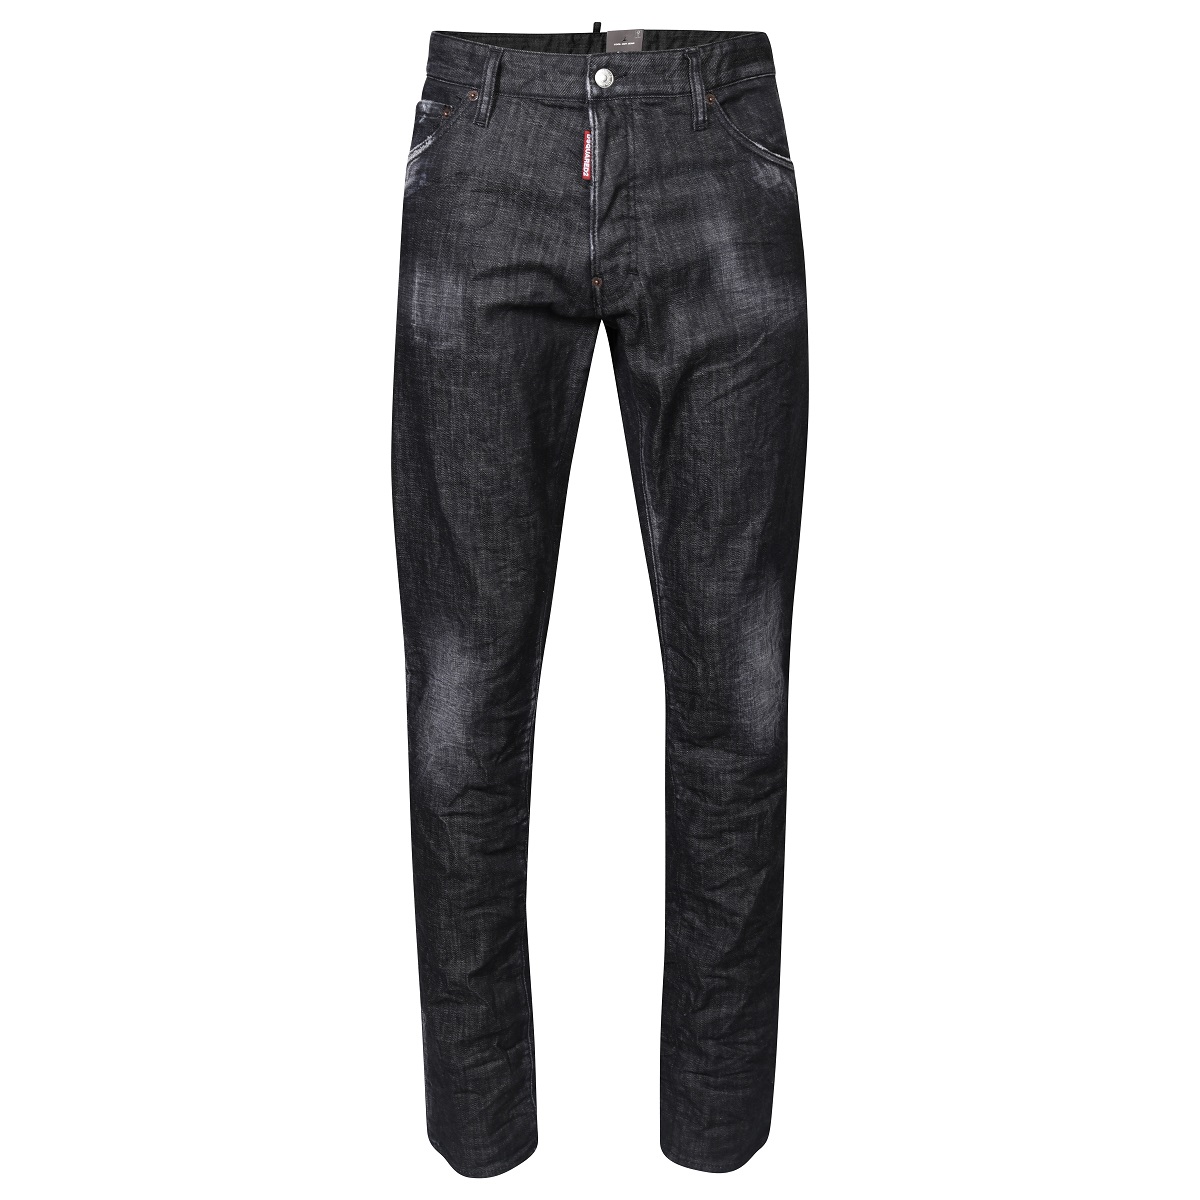 DSQUARED2 Jeans Cool Guy in Black 52